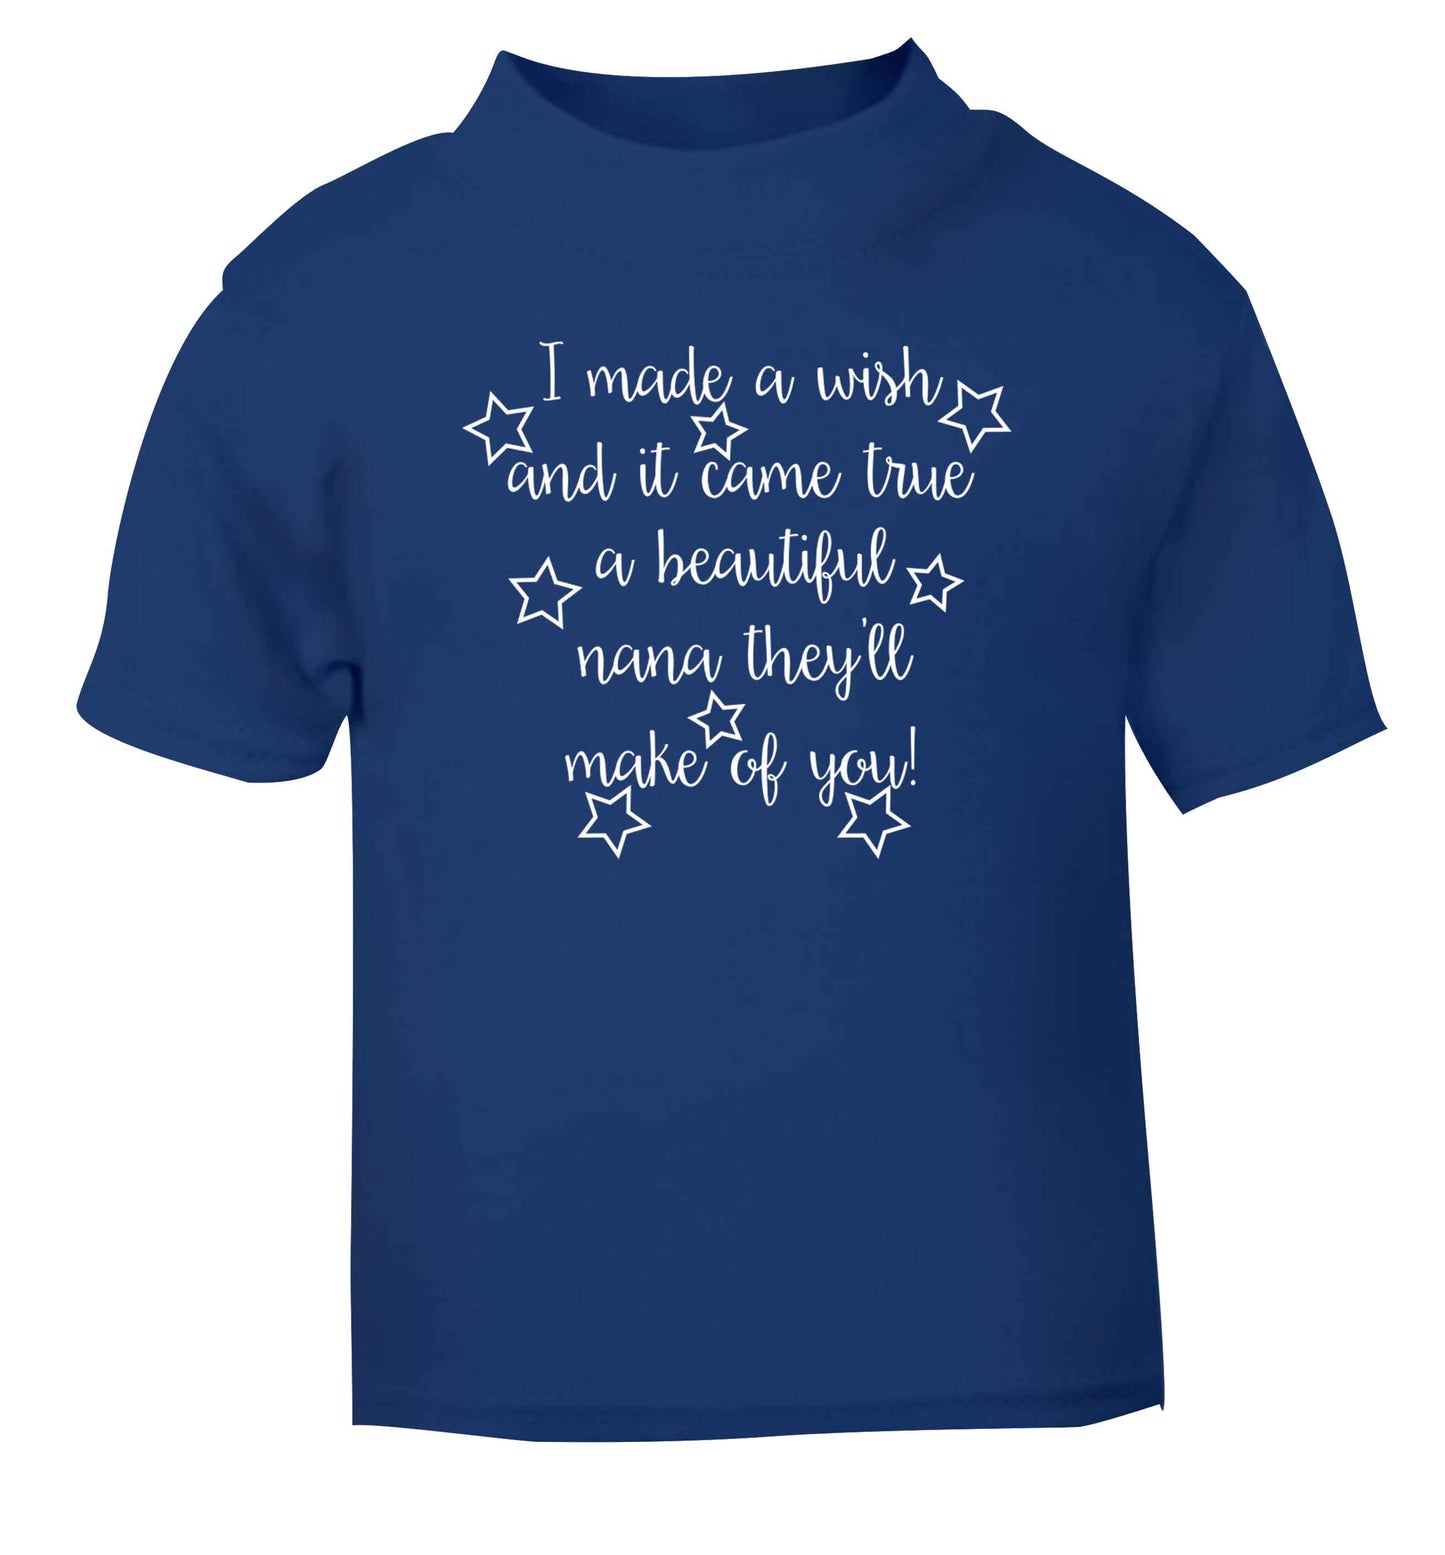 I made a wish and it came true a beautiful nana they'll make of you! blue Baby Toddler Tshirt 2 Years